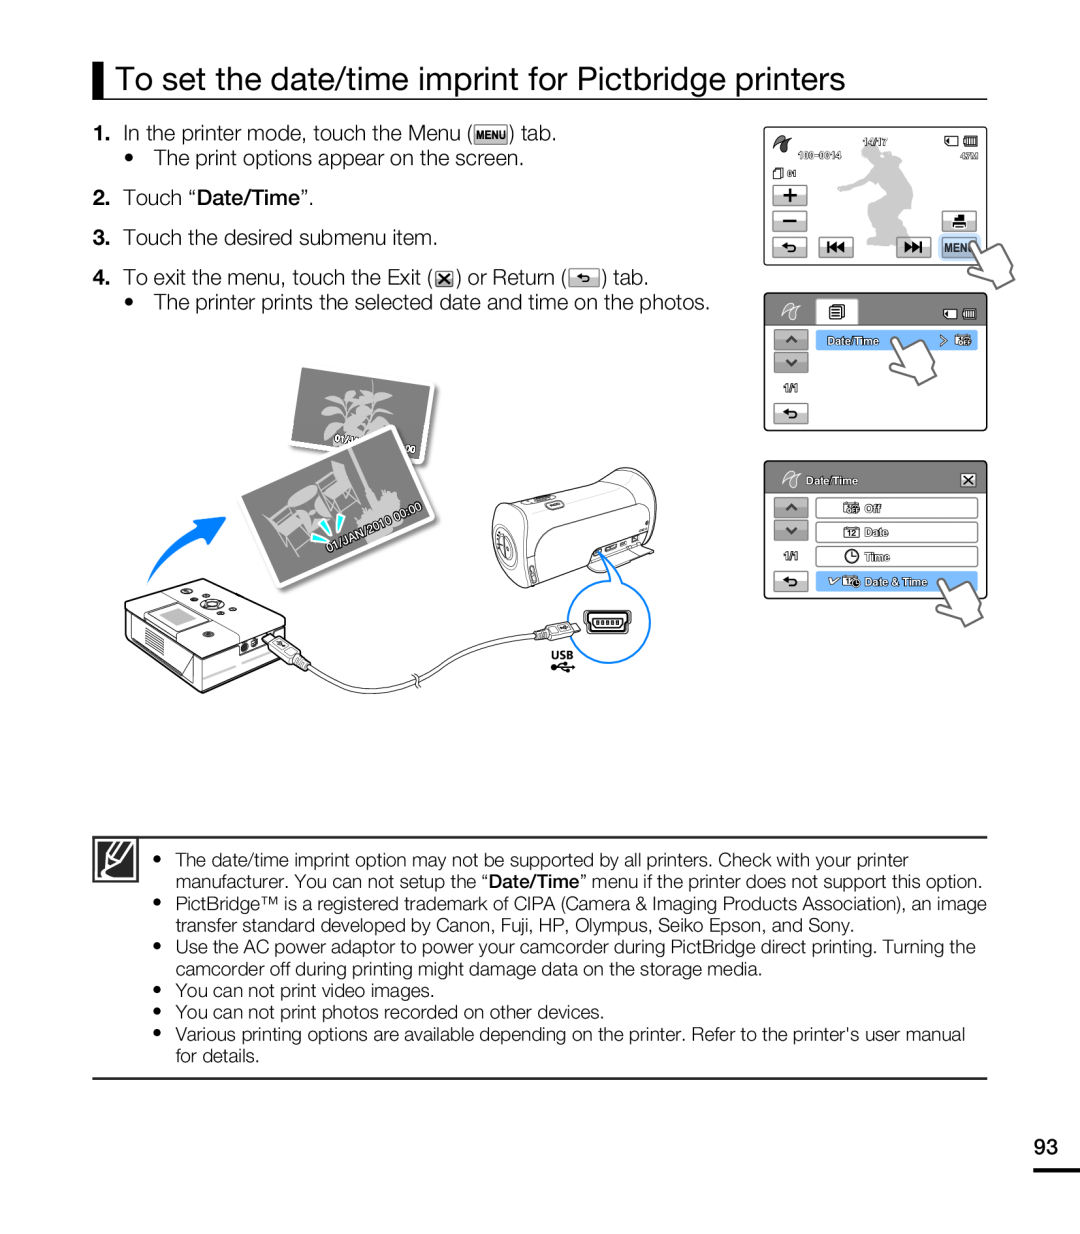 Samsung HMX-T10BP/EDC manual To set the date/time imprint for Pictbridge printers, In the printer mode, touch the Menu tab 